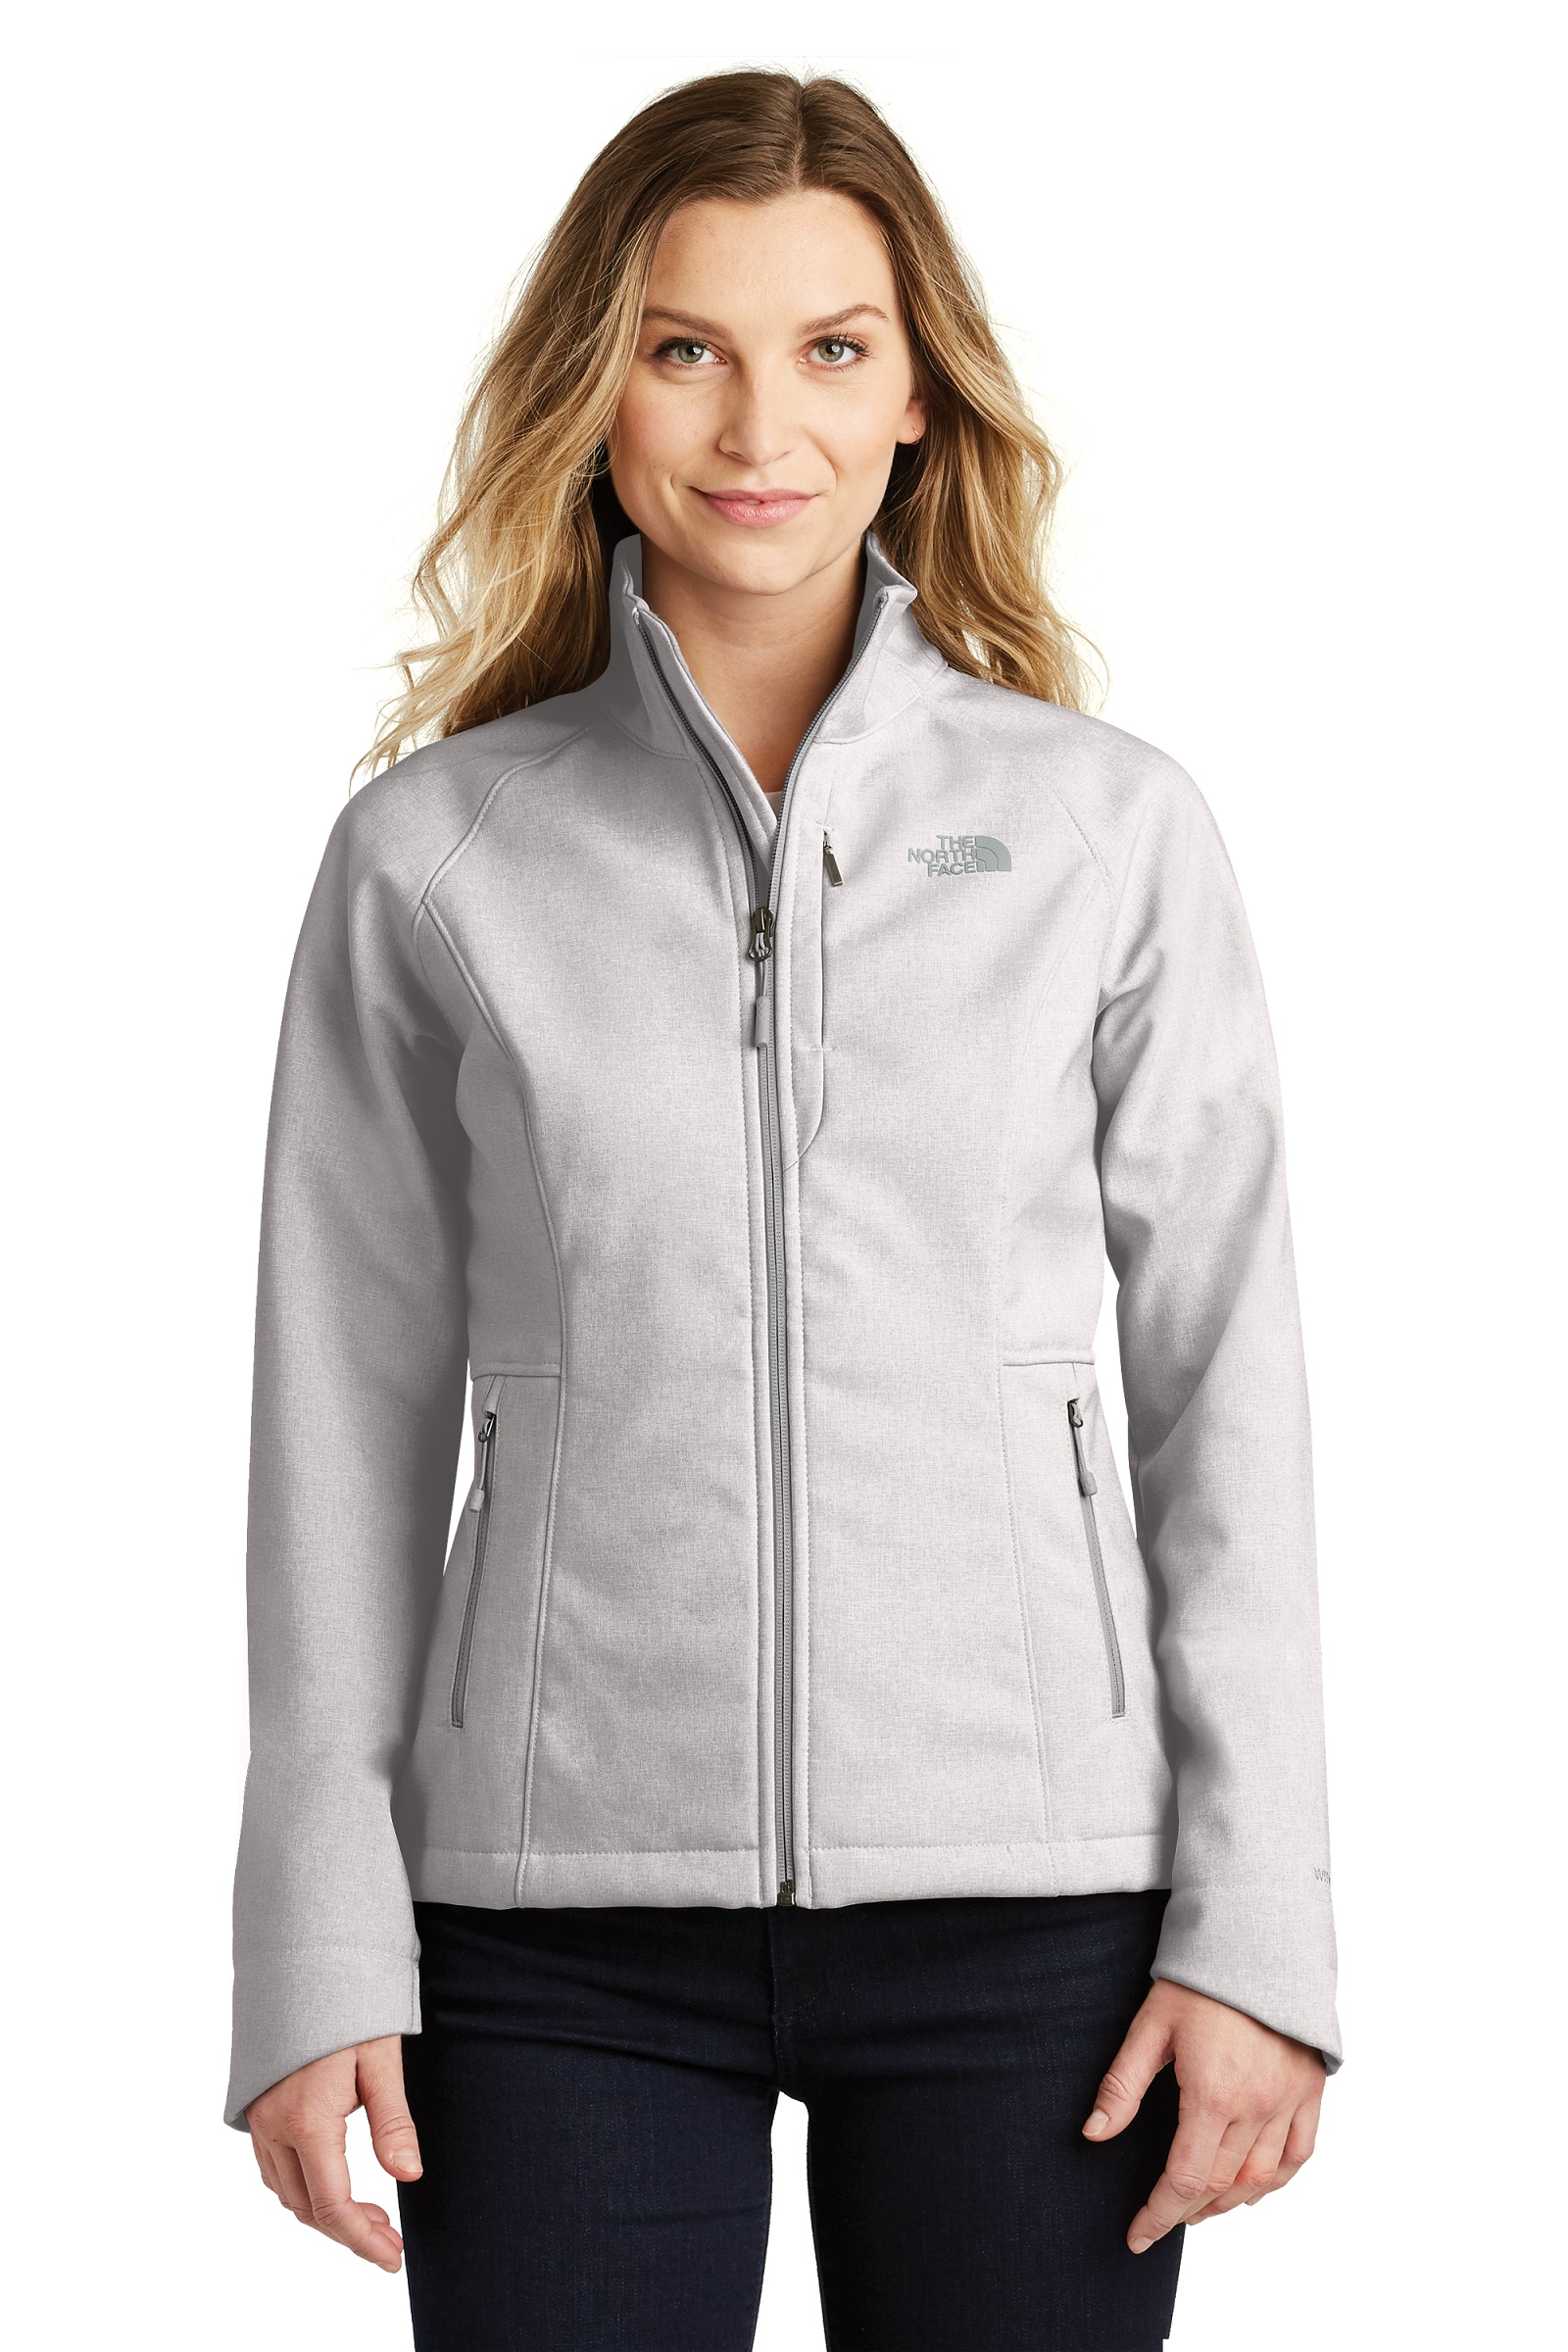 snap Kiezen Dalset The North Face Embroidered Women's Apex Barrier Soft Shell Jacket | The  North Face - Queensboro